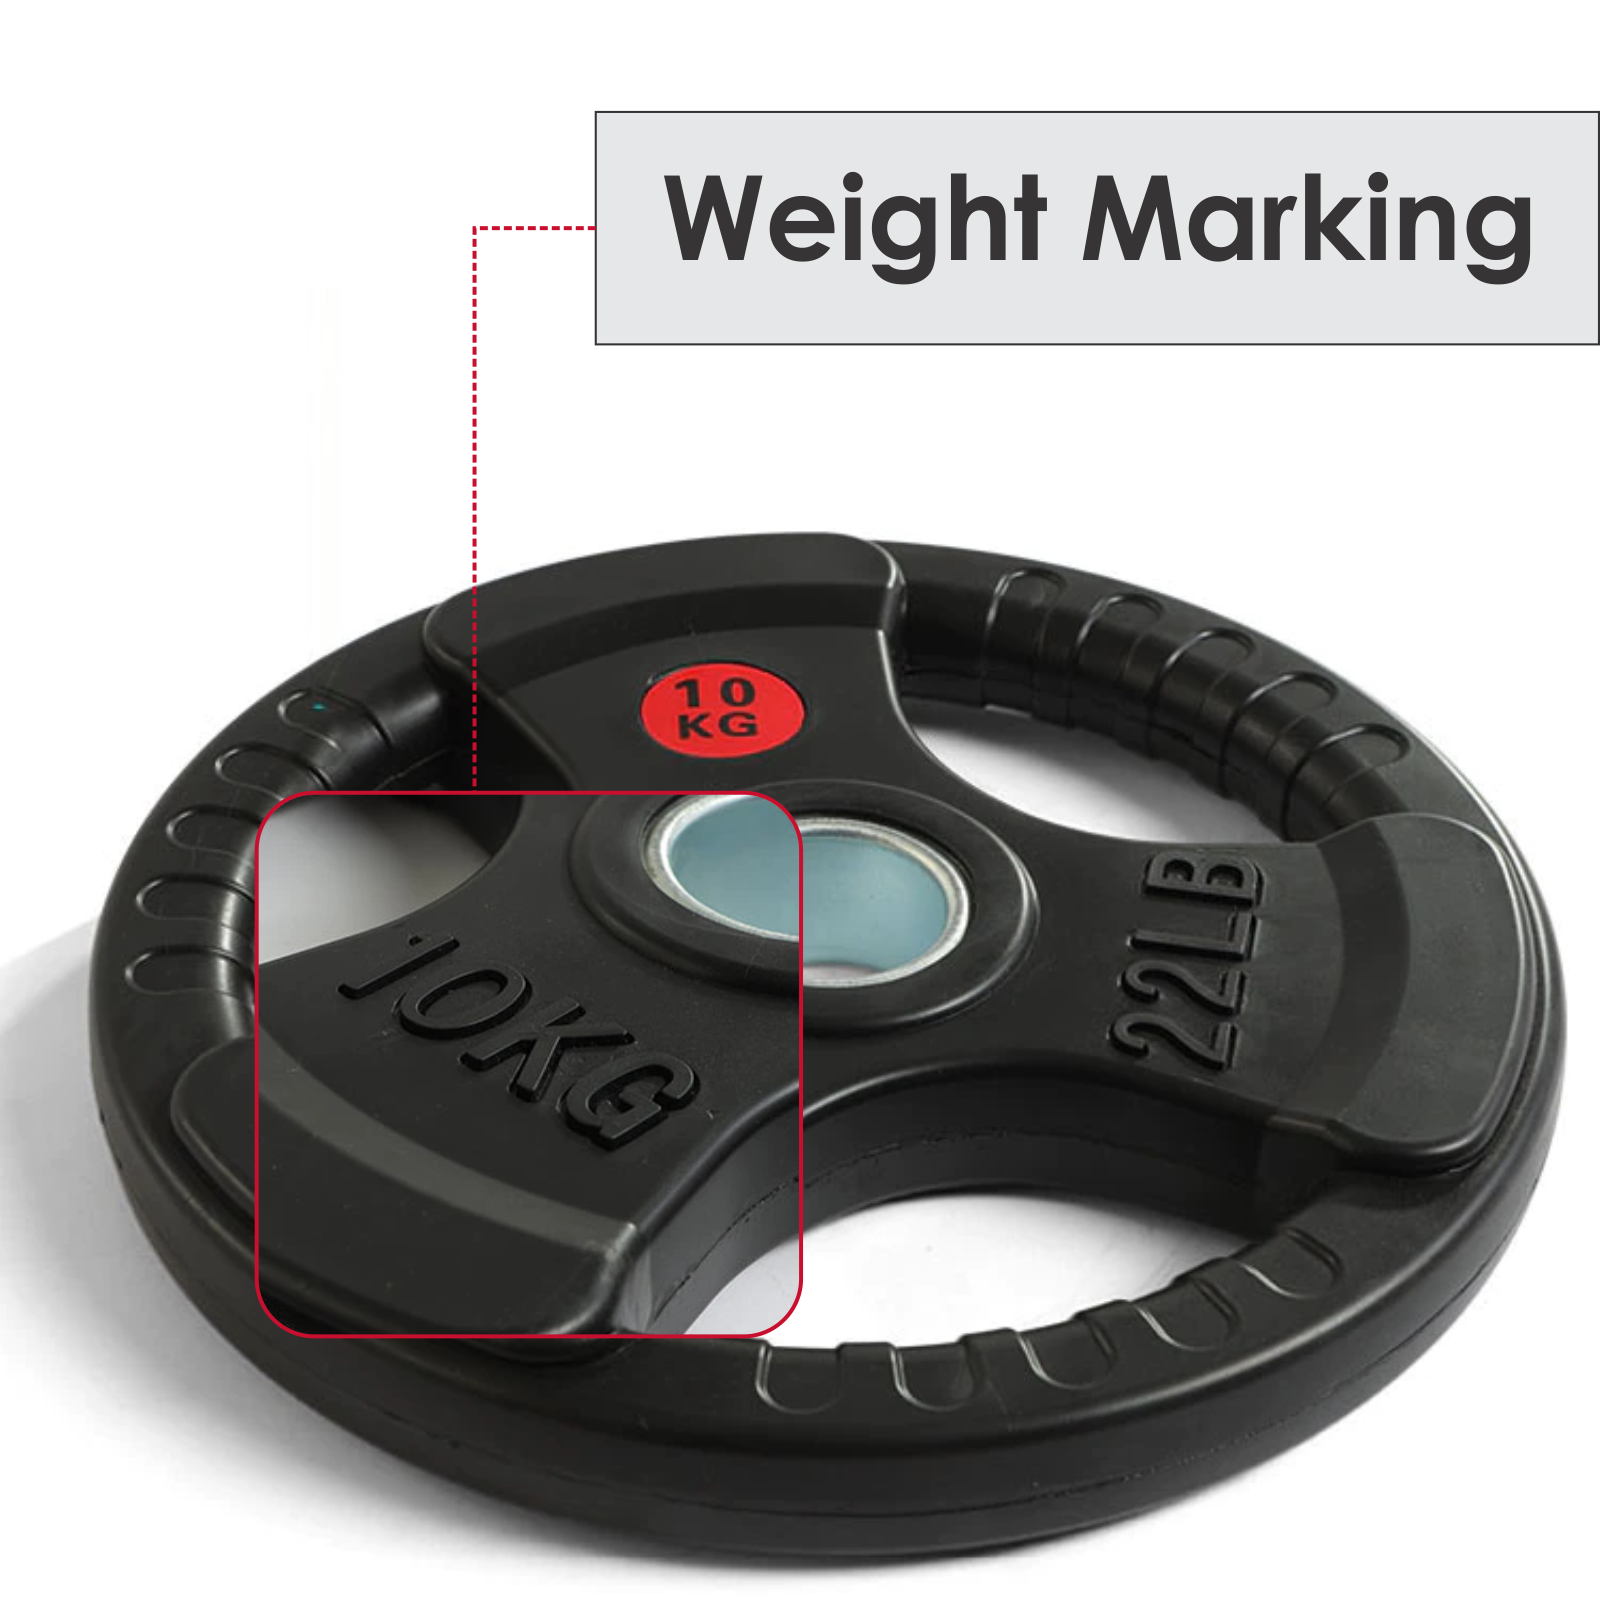 10 KG Weight Plate_1